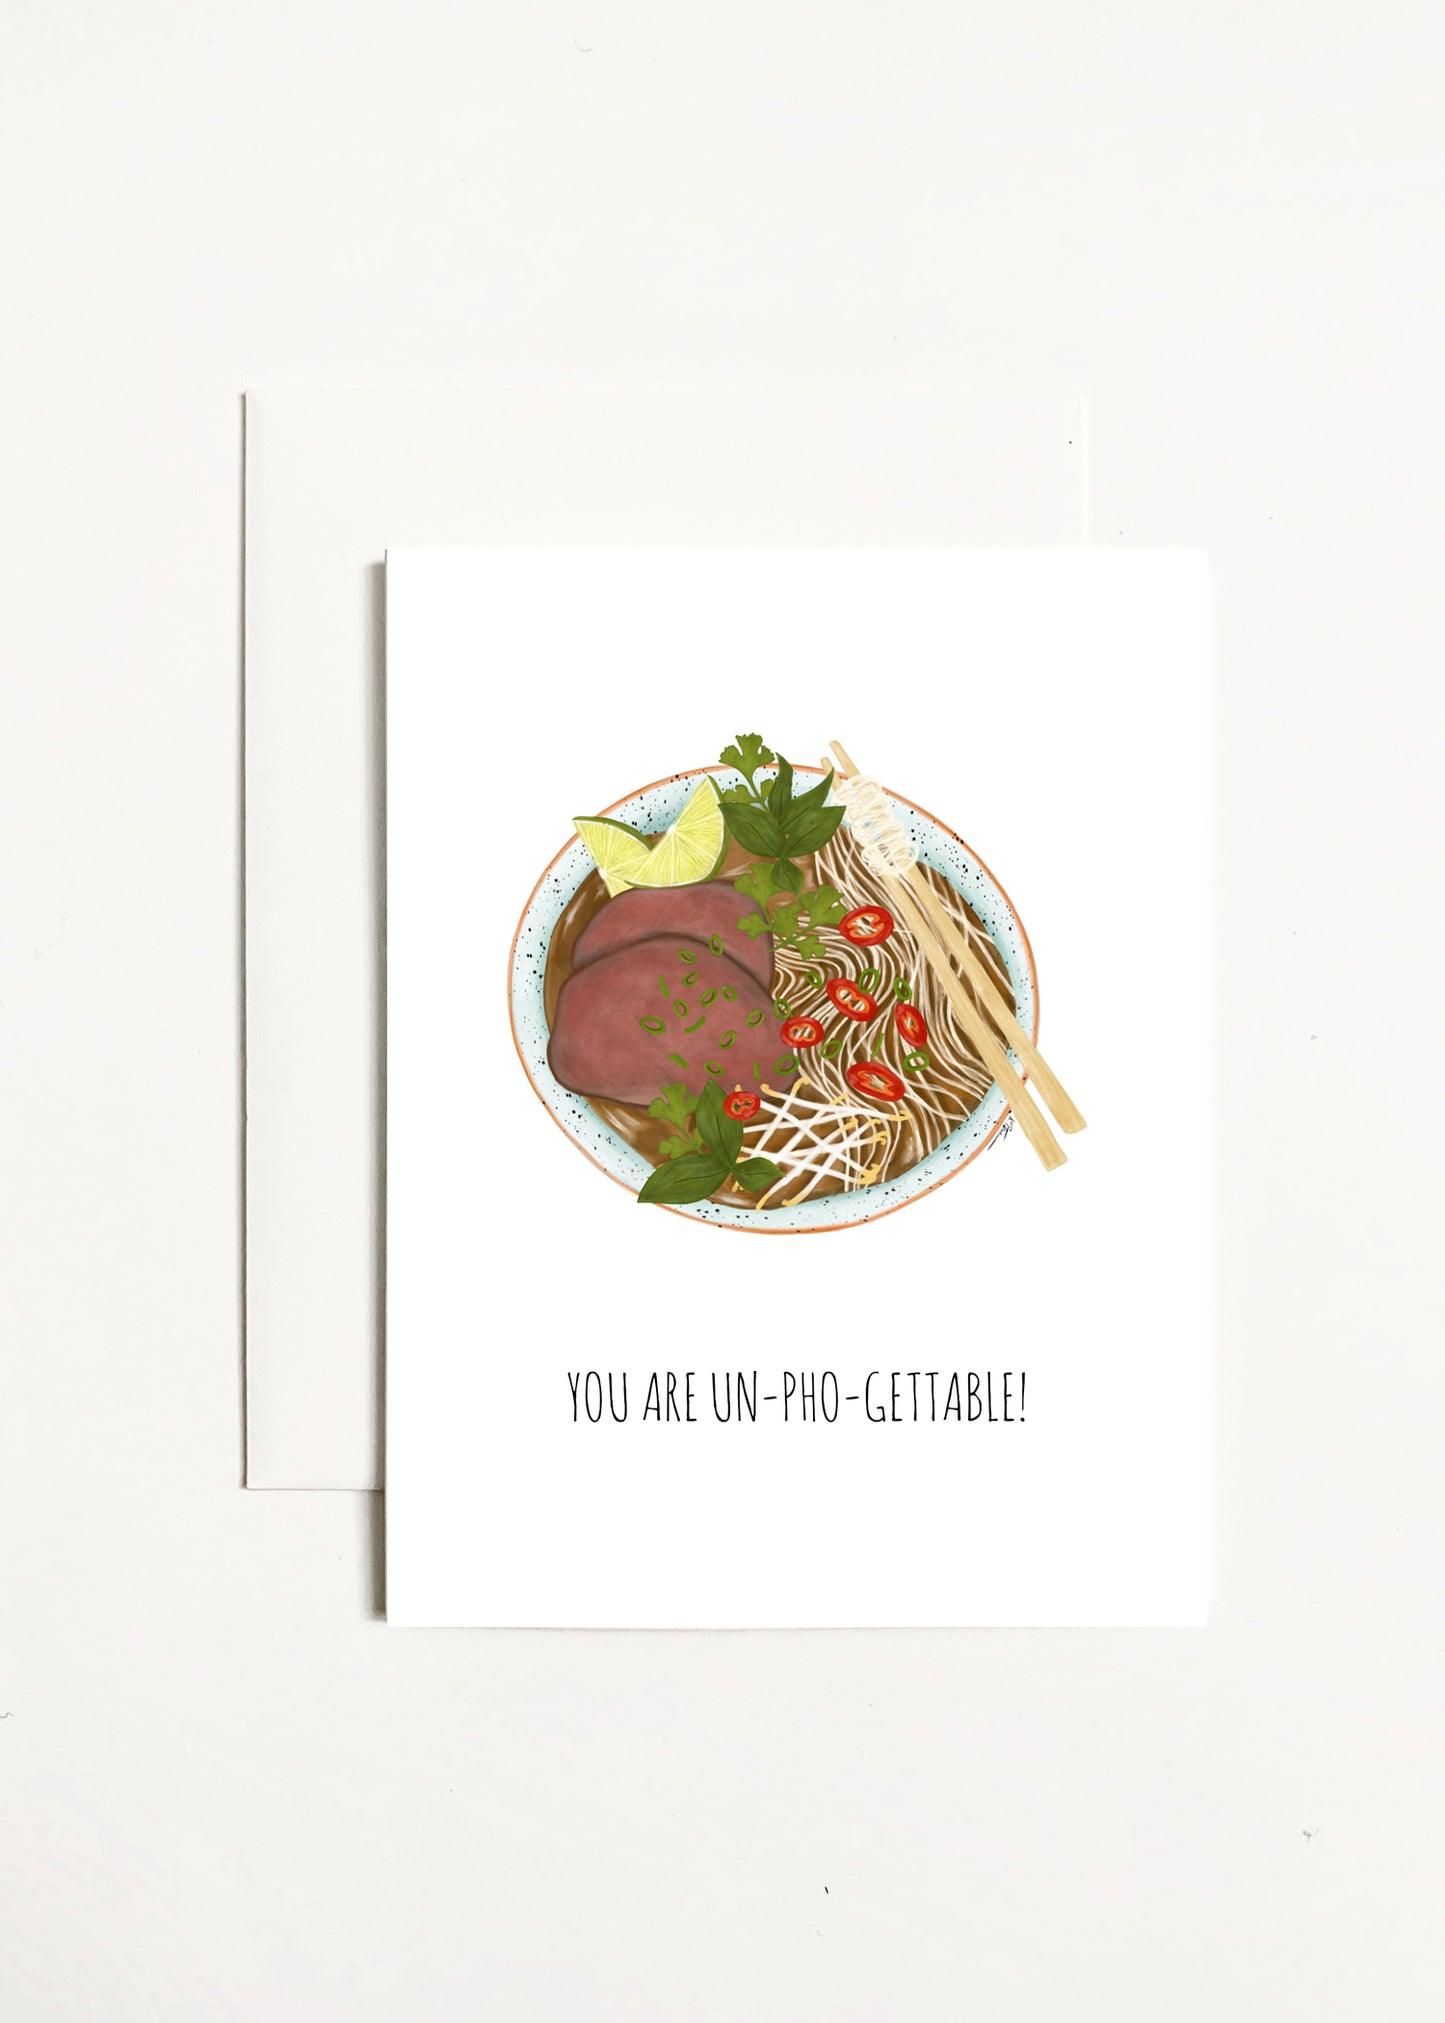 You Are Un-Pho-Gettable!